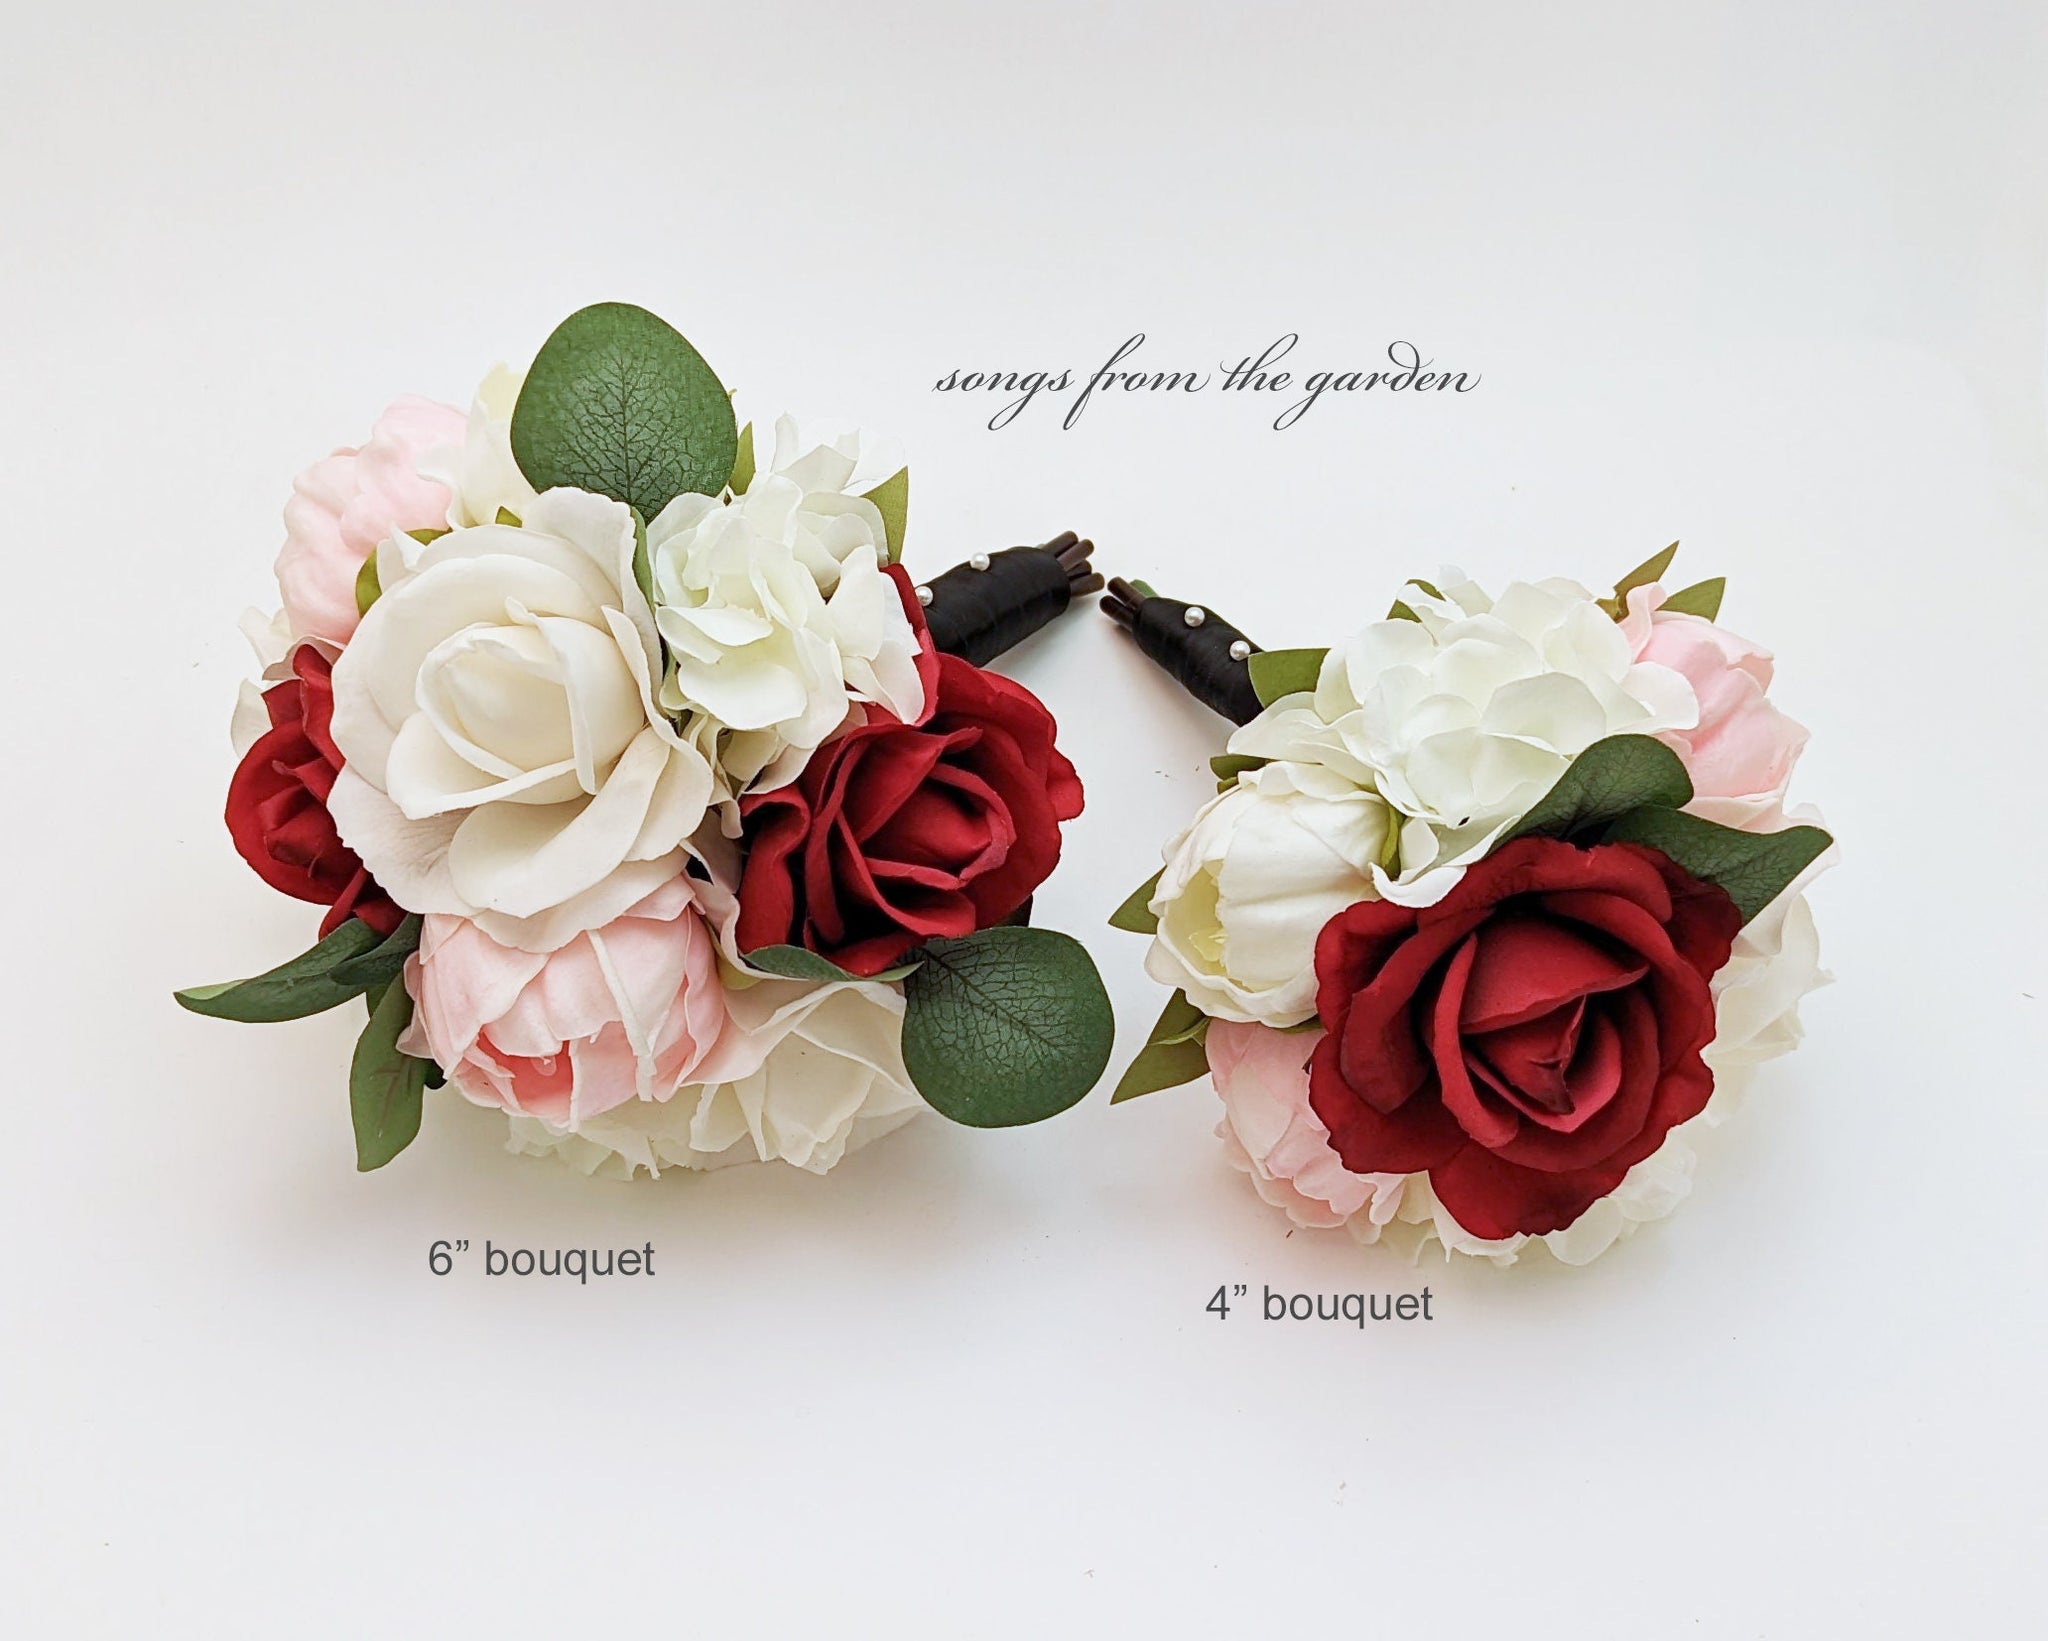 Blush Gold Red Bridal or Bridesmaid Bouquet Eucalyptus Peonies Roses - Add Boutonniere Corsage Wedding Centerpiece Crown & More!